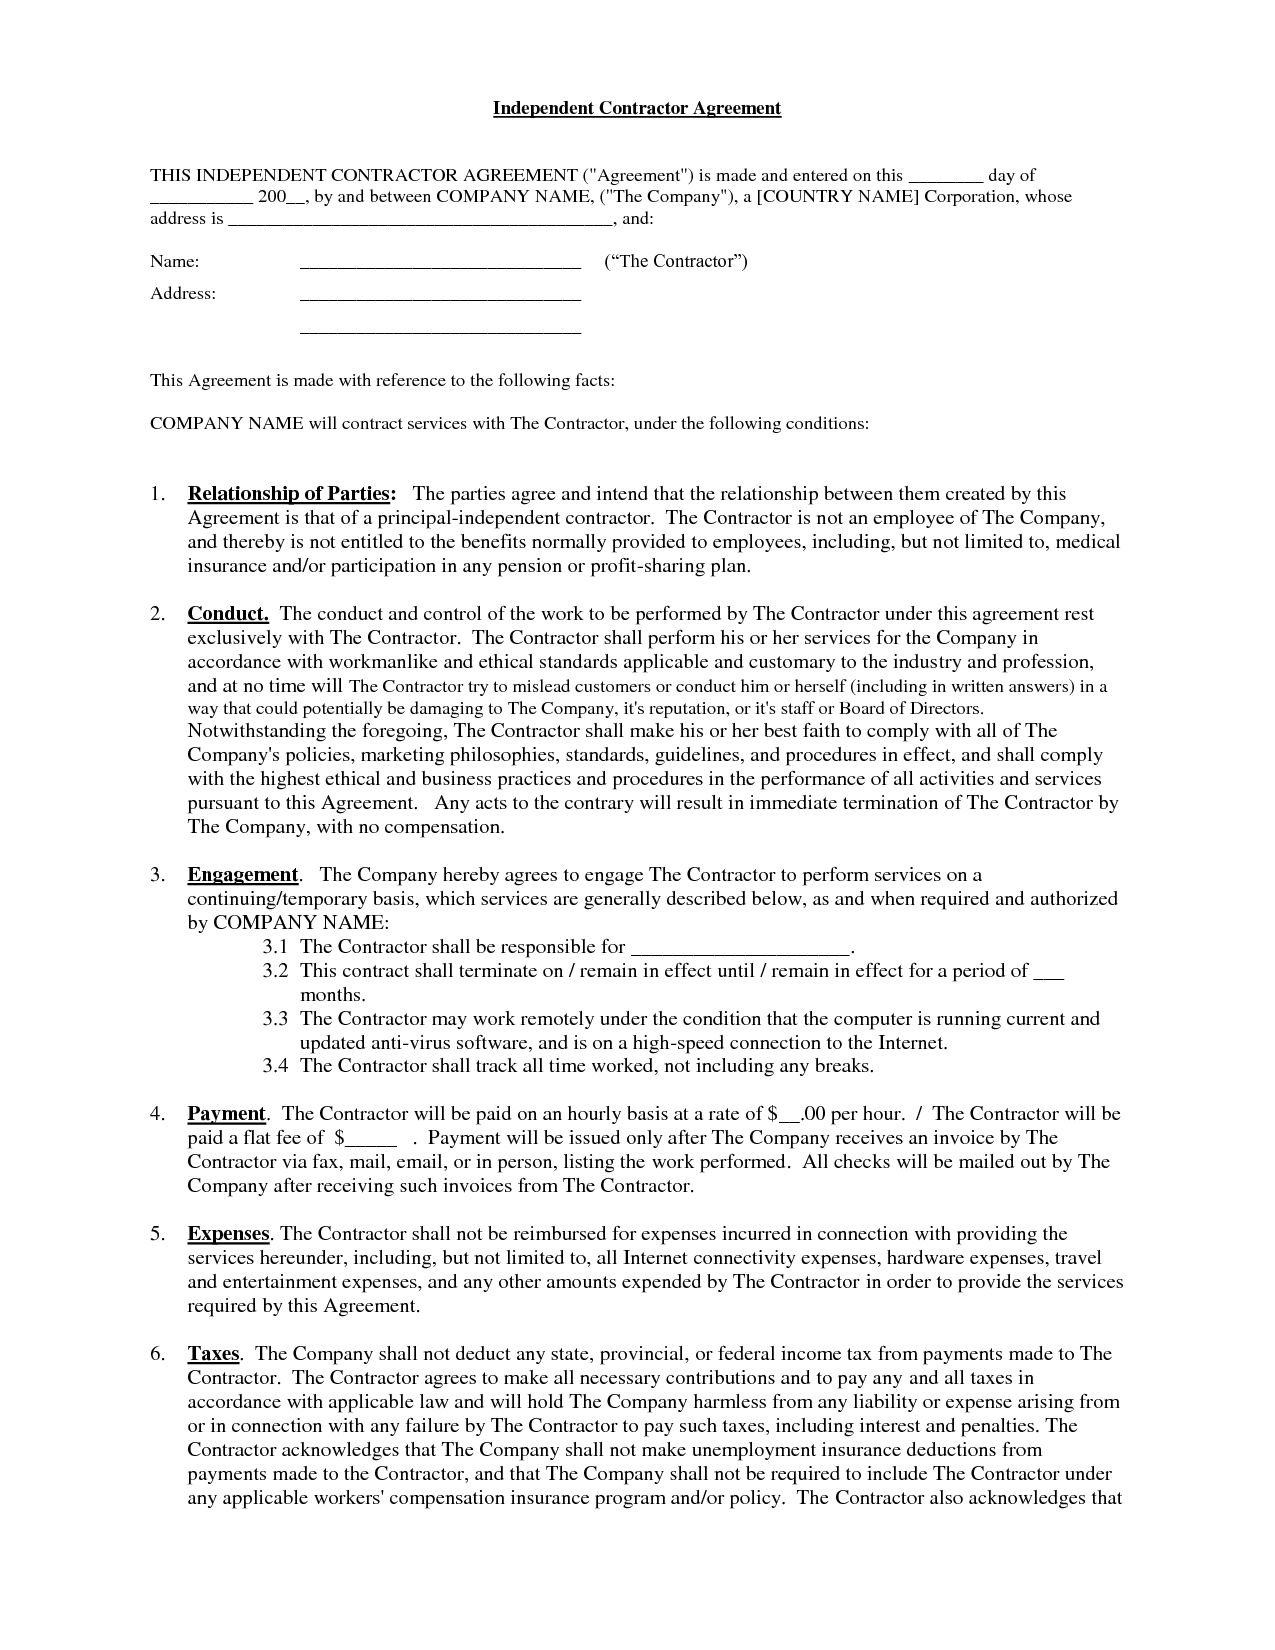 independent-contractor-contract-sample-free-printable-documents